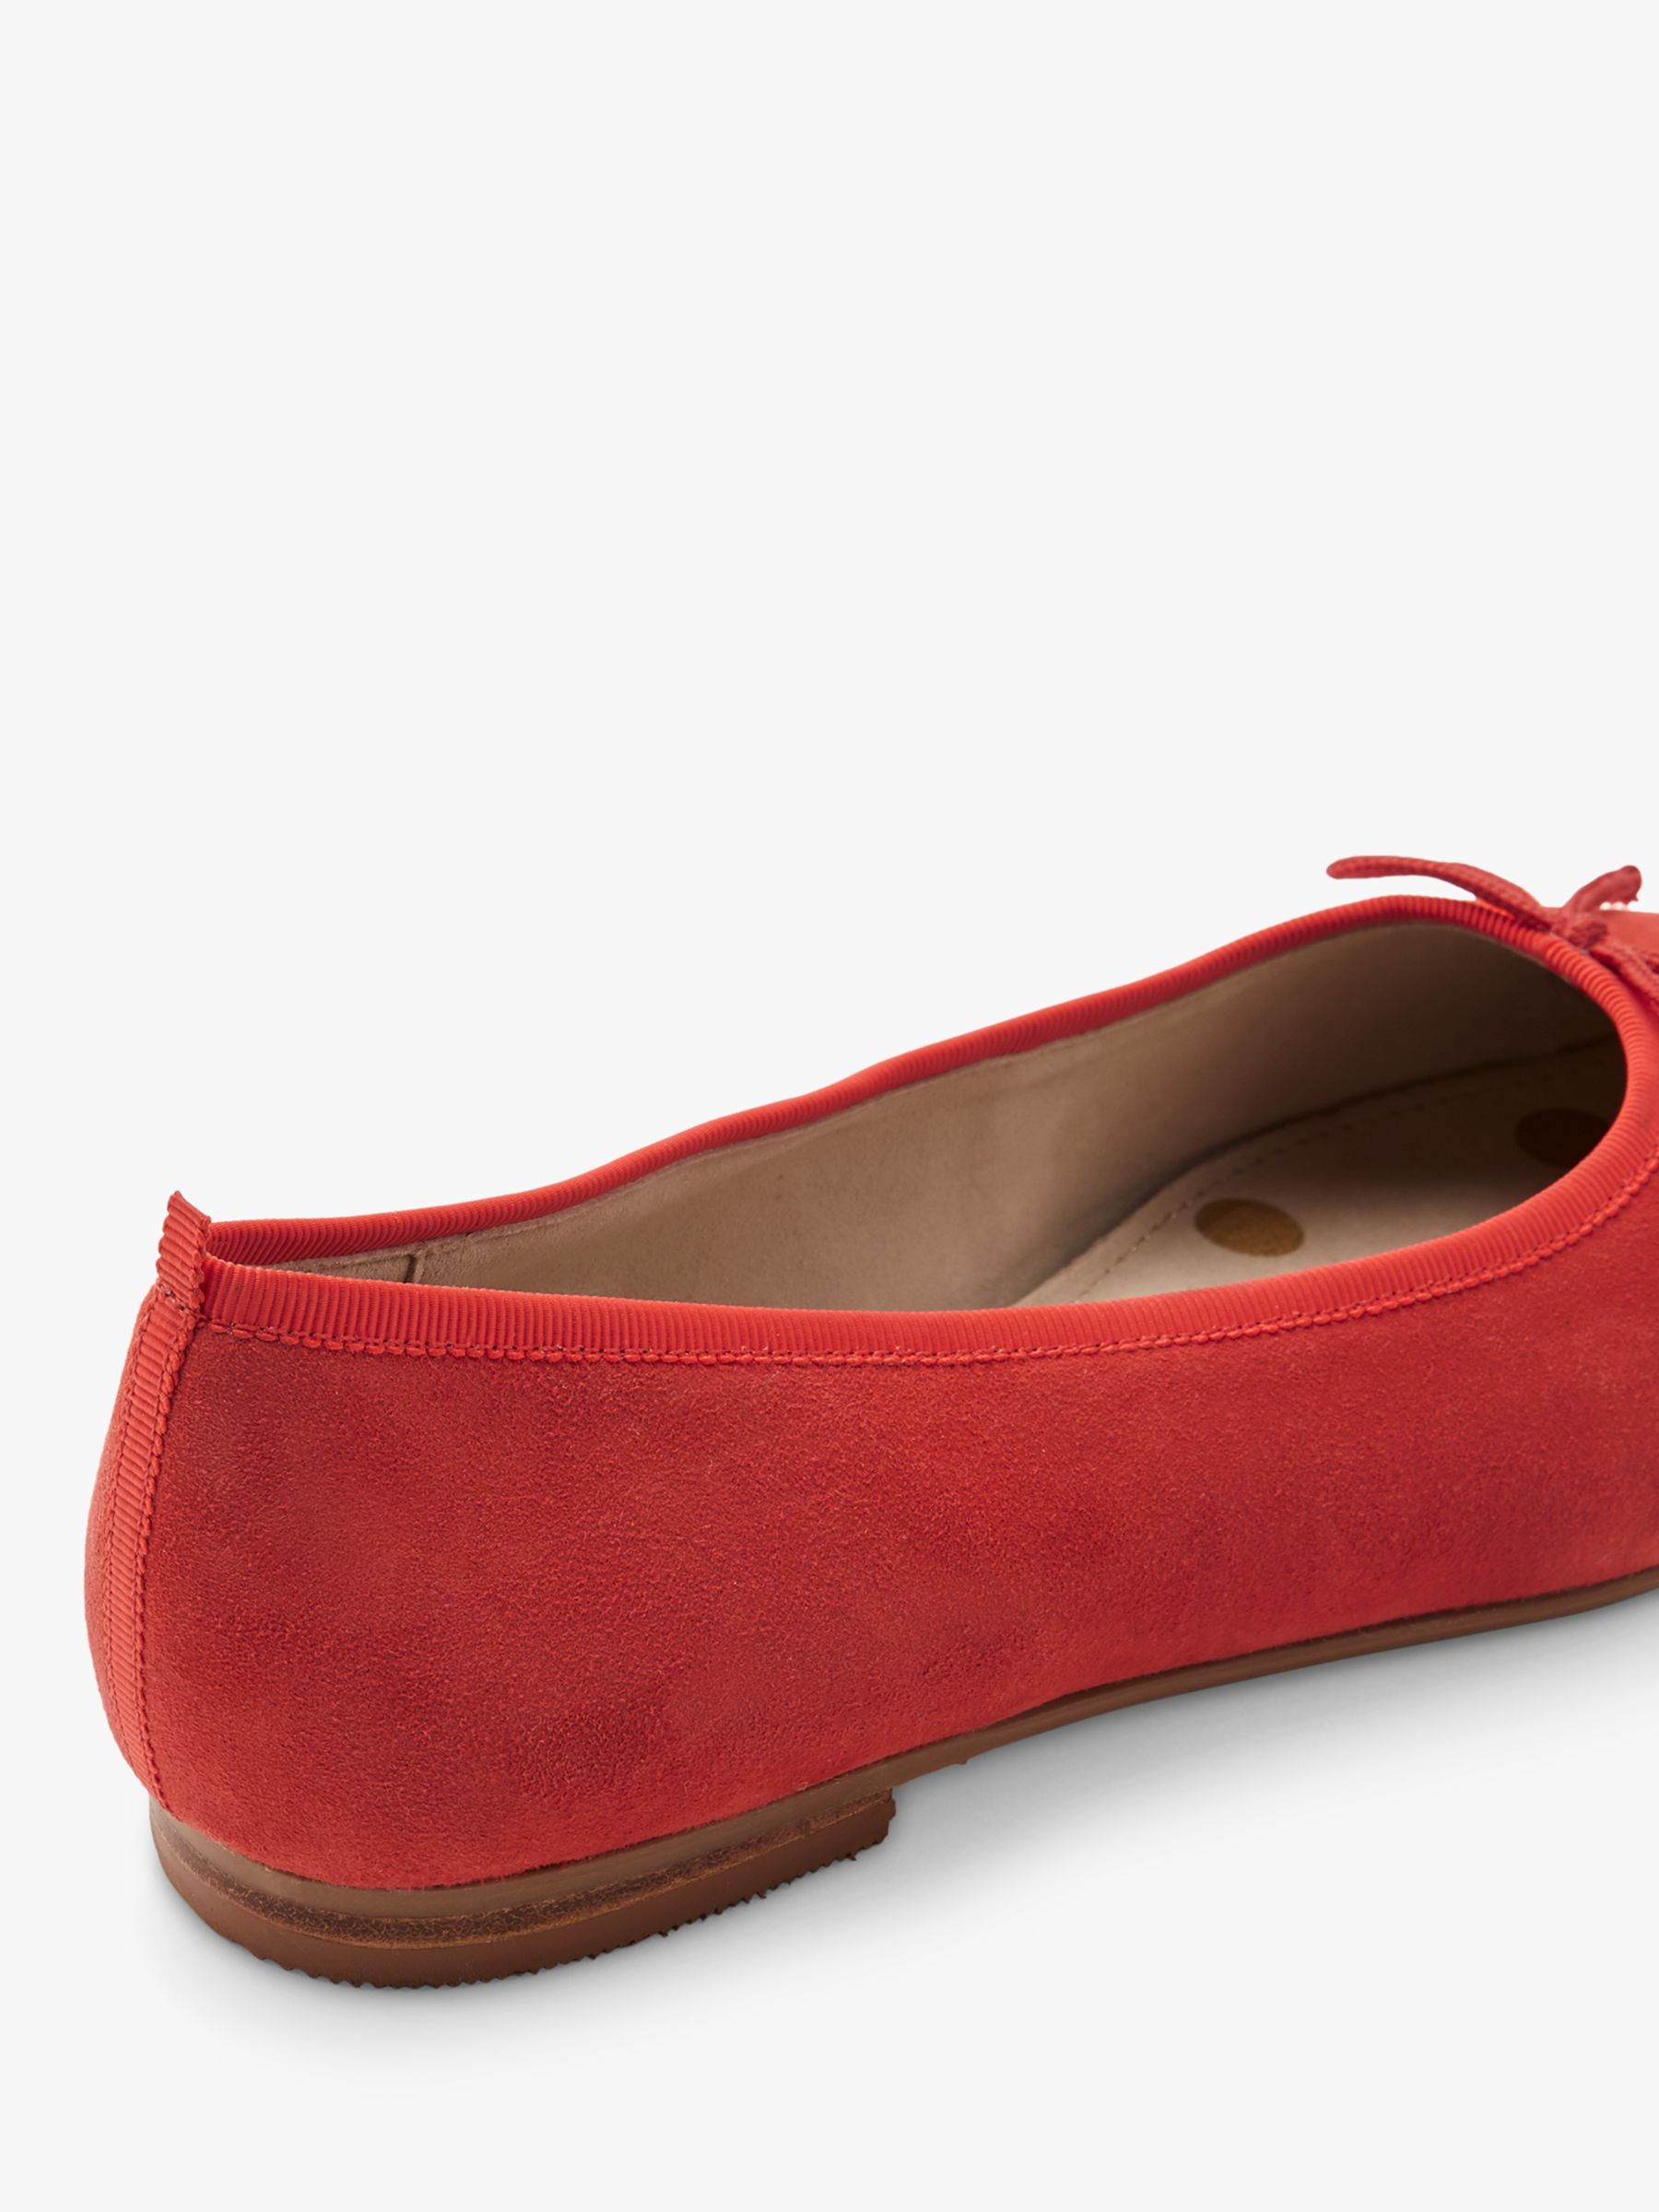 Boden High Cut Suede Pumps, Red at John Lewis & Partners